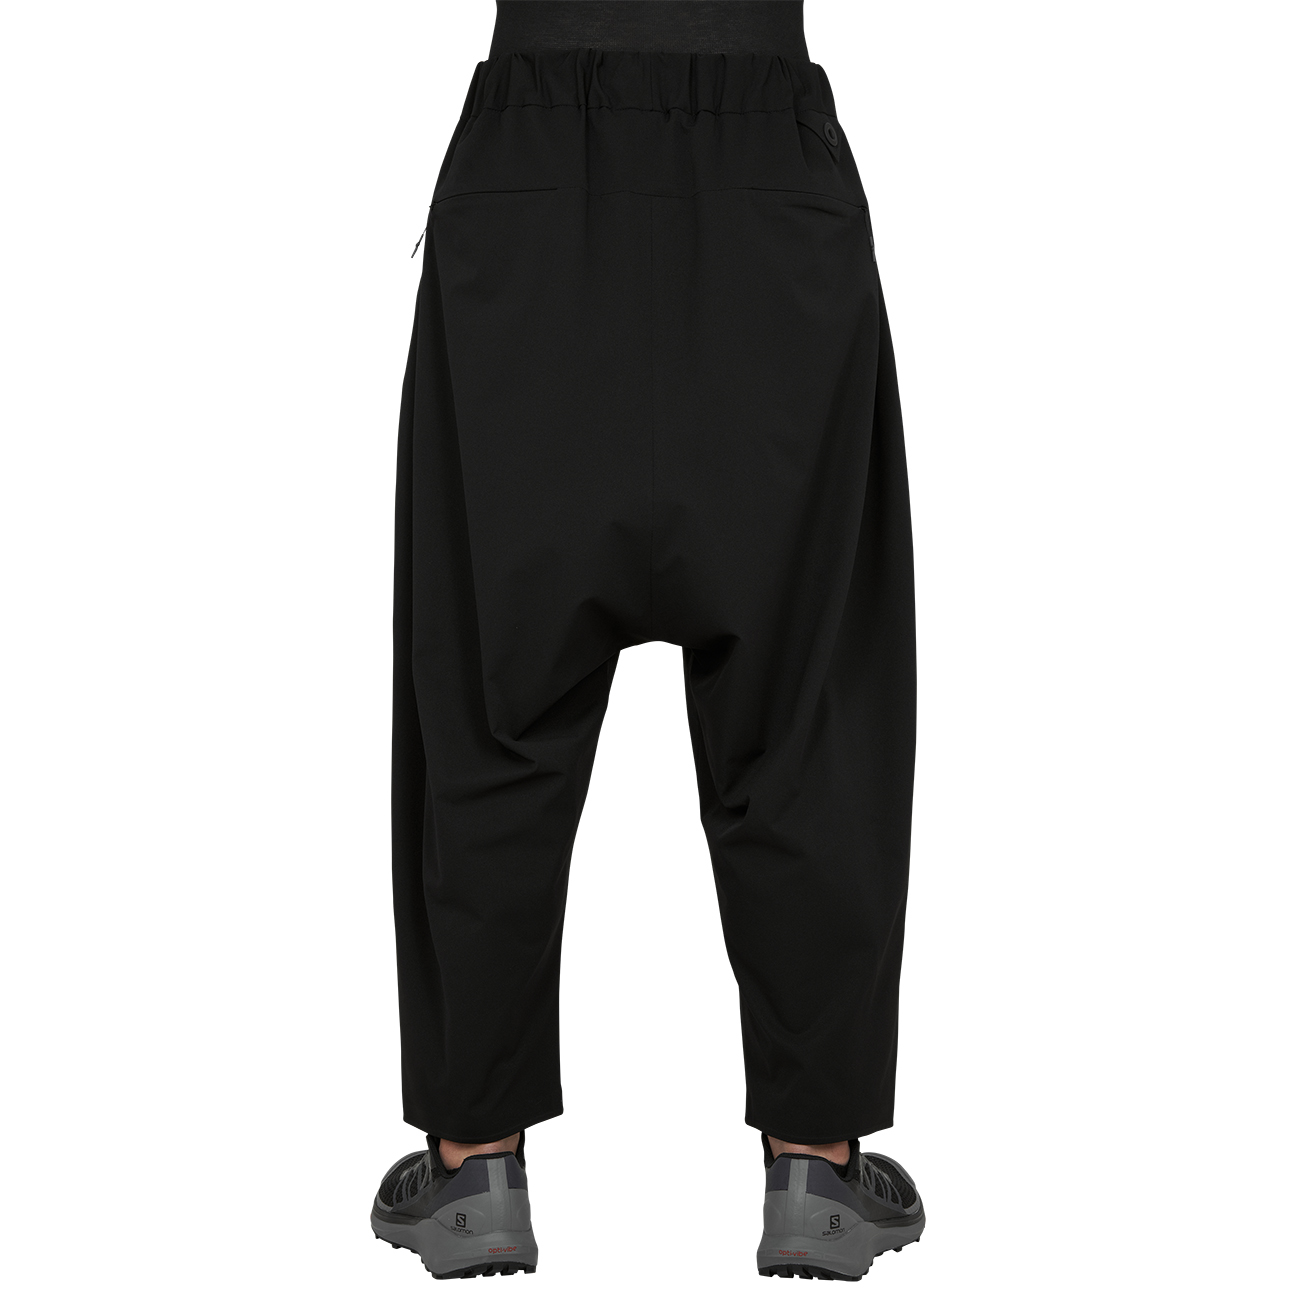 WHITE MOUNTAINEERING BLK (ホワイトマウンテニアリング ビーエルケー) - 22AW STRETCHED SARROUEL PANTS BLACKの詳細画像4